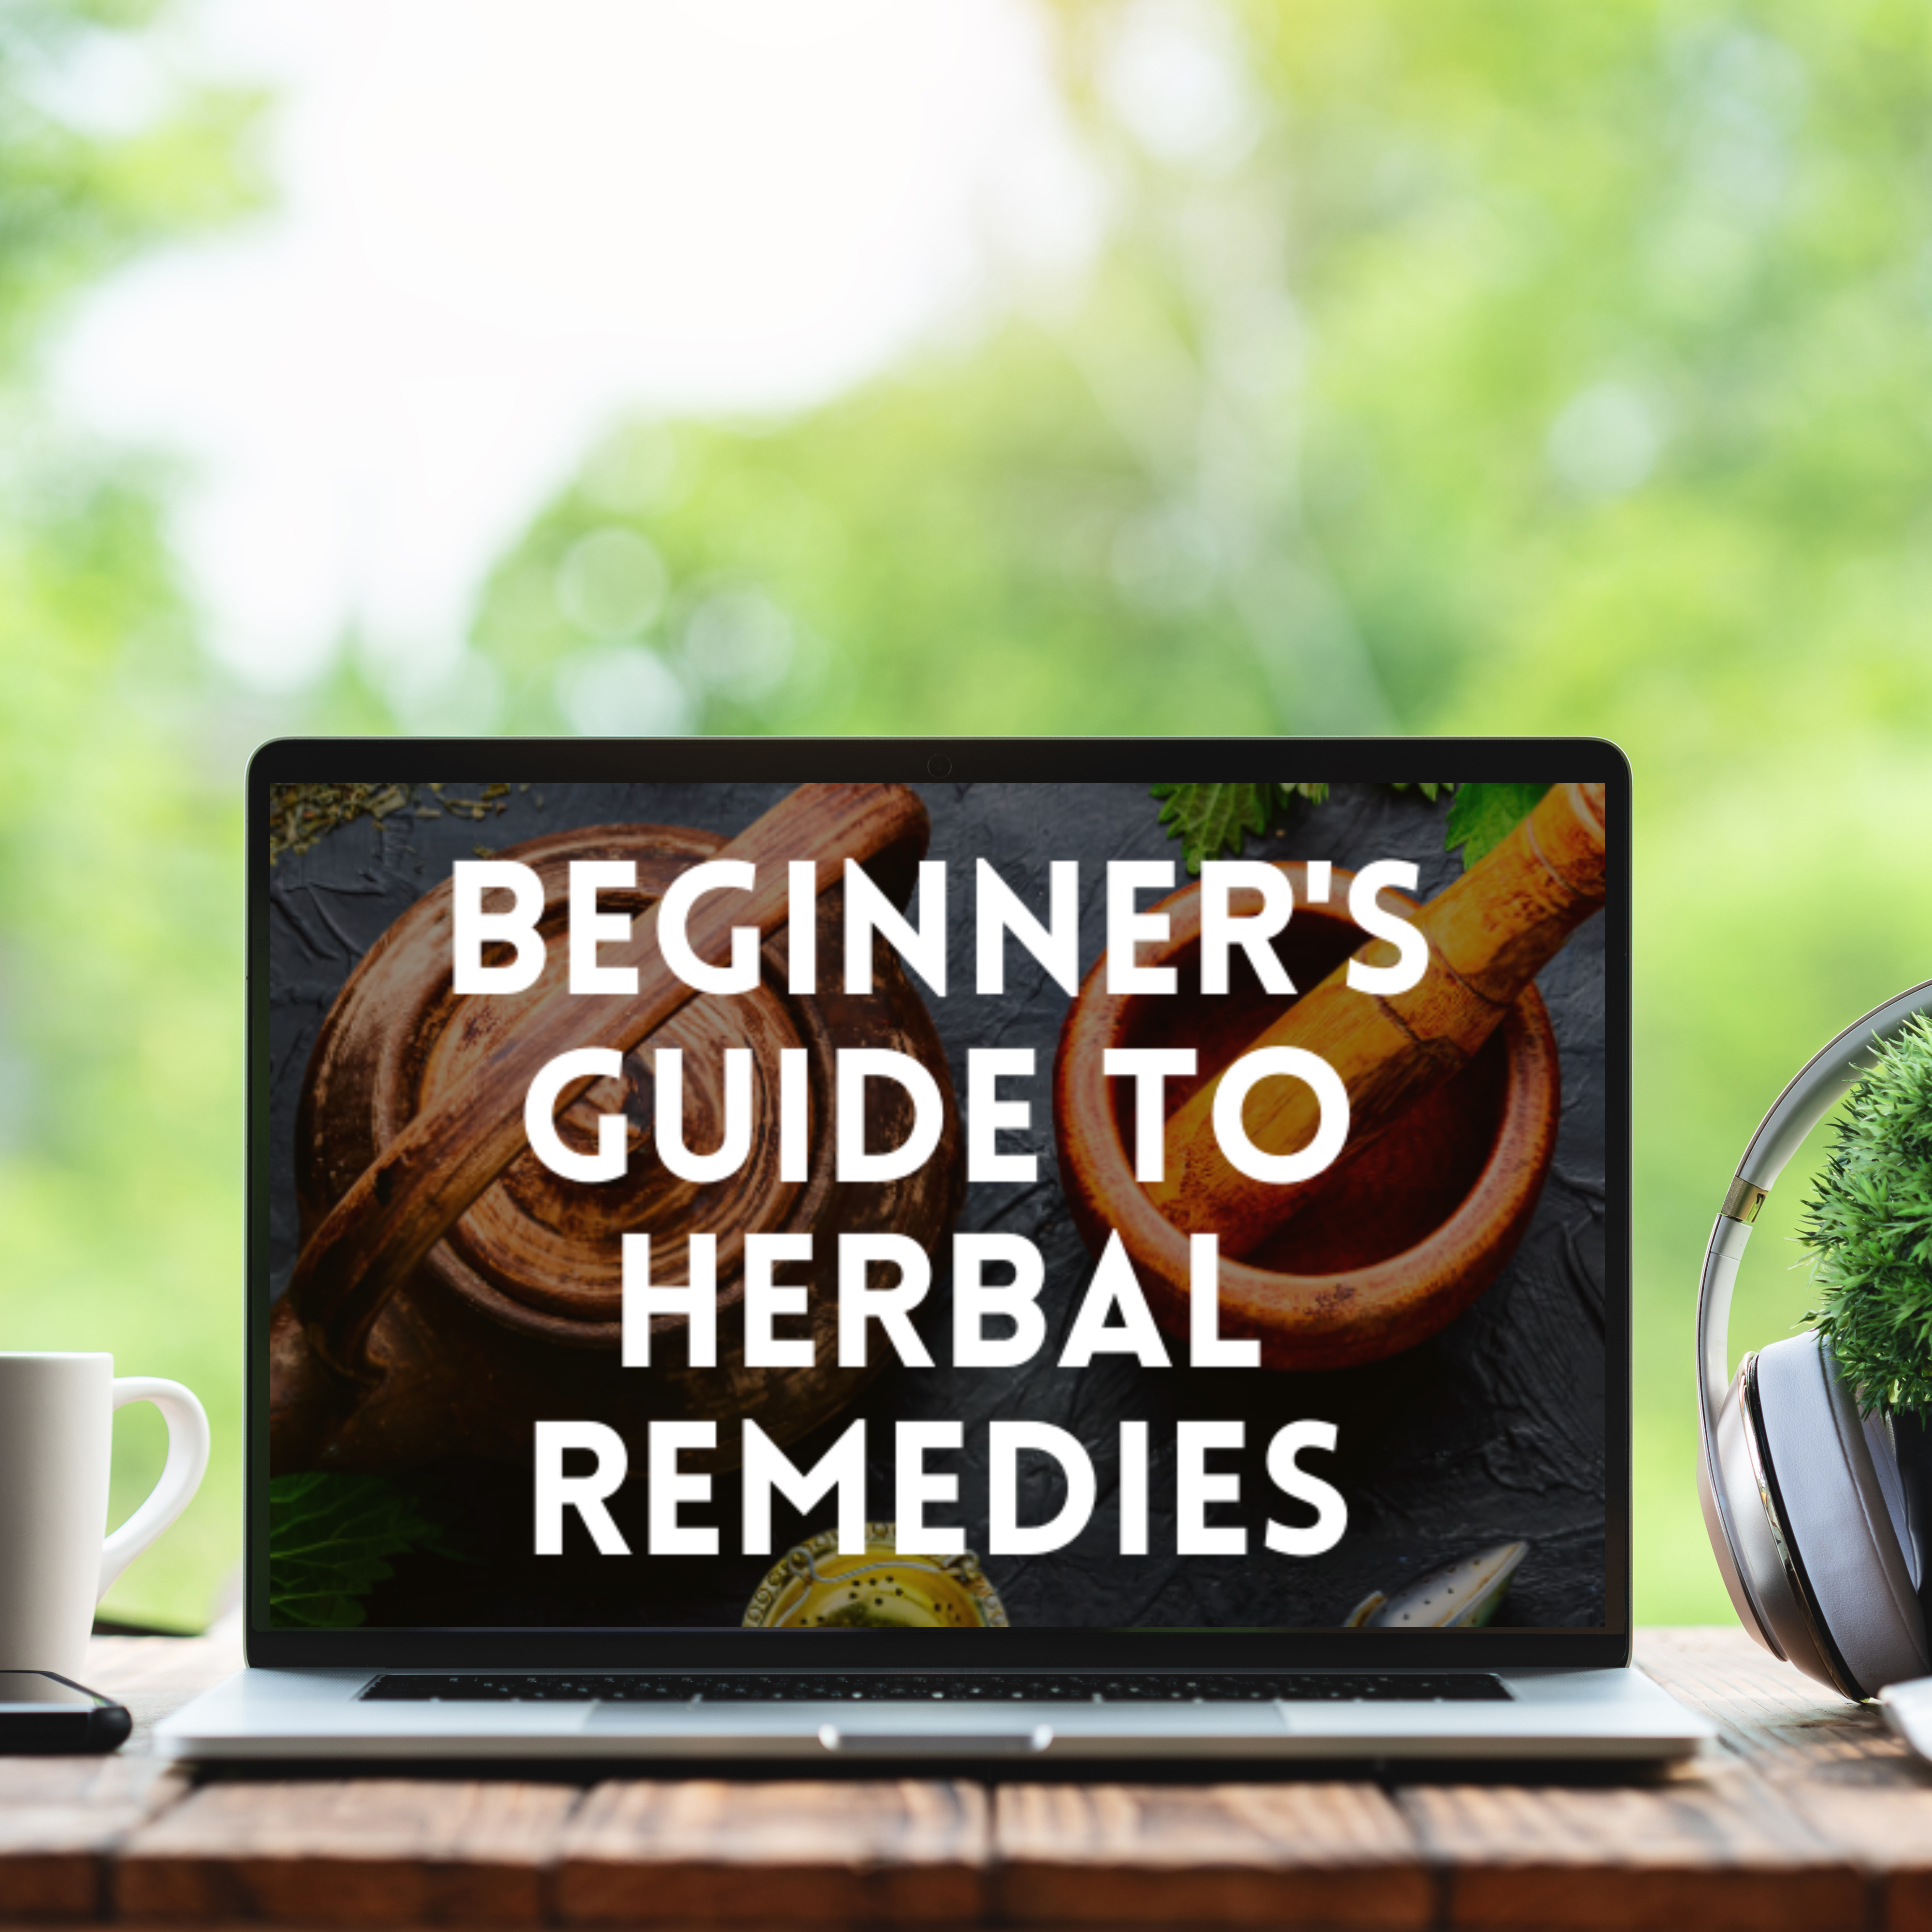 Beginner's Guide to Herbal Remedies E-Book🌿